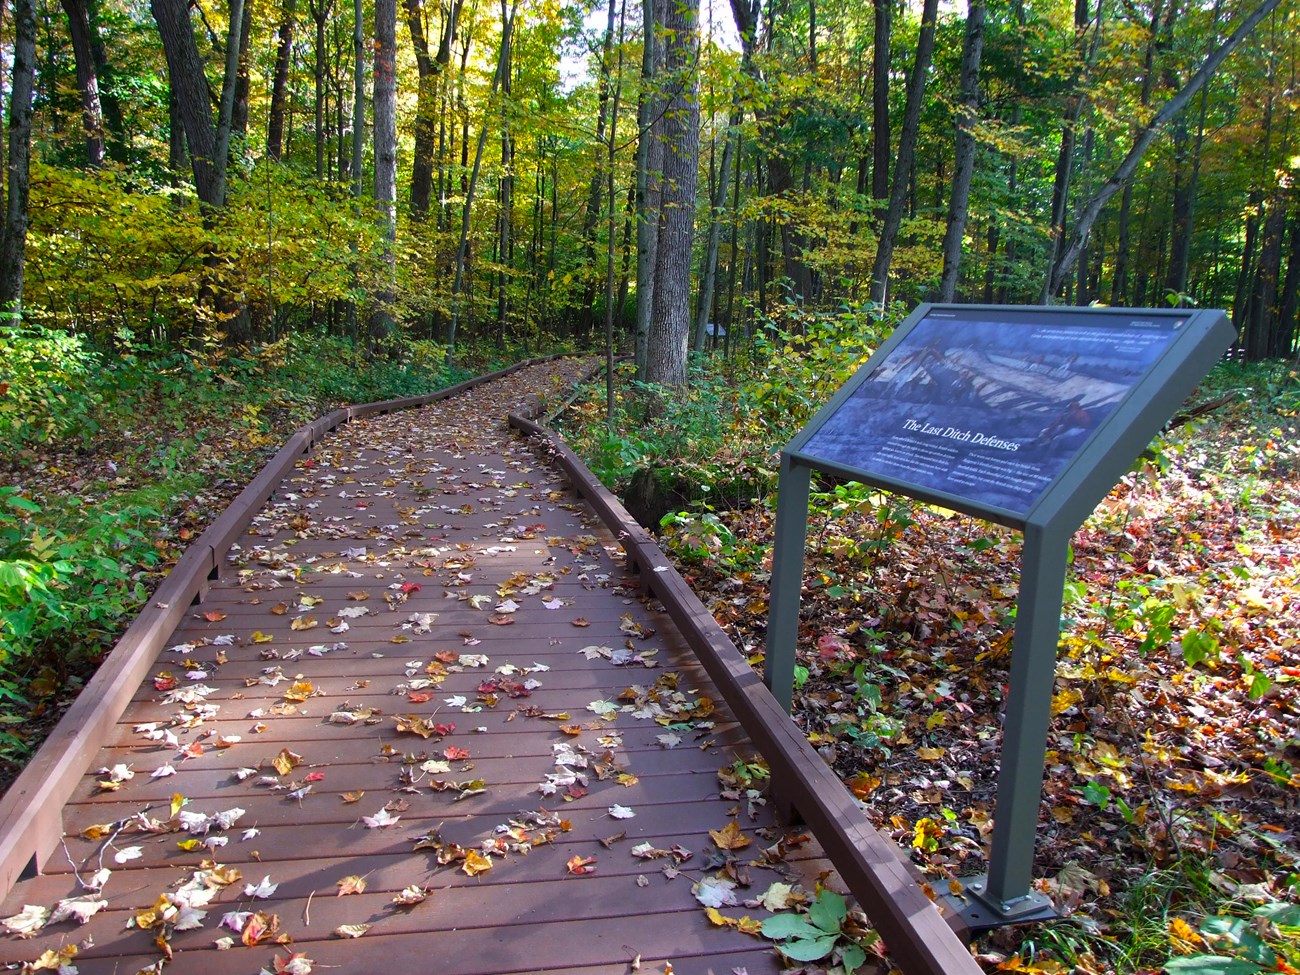 Boardwalk path through woods with wayside sign on right